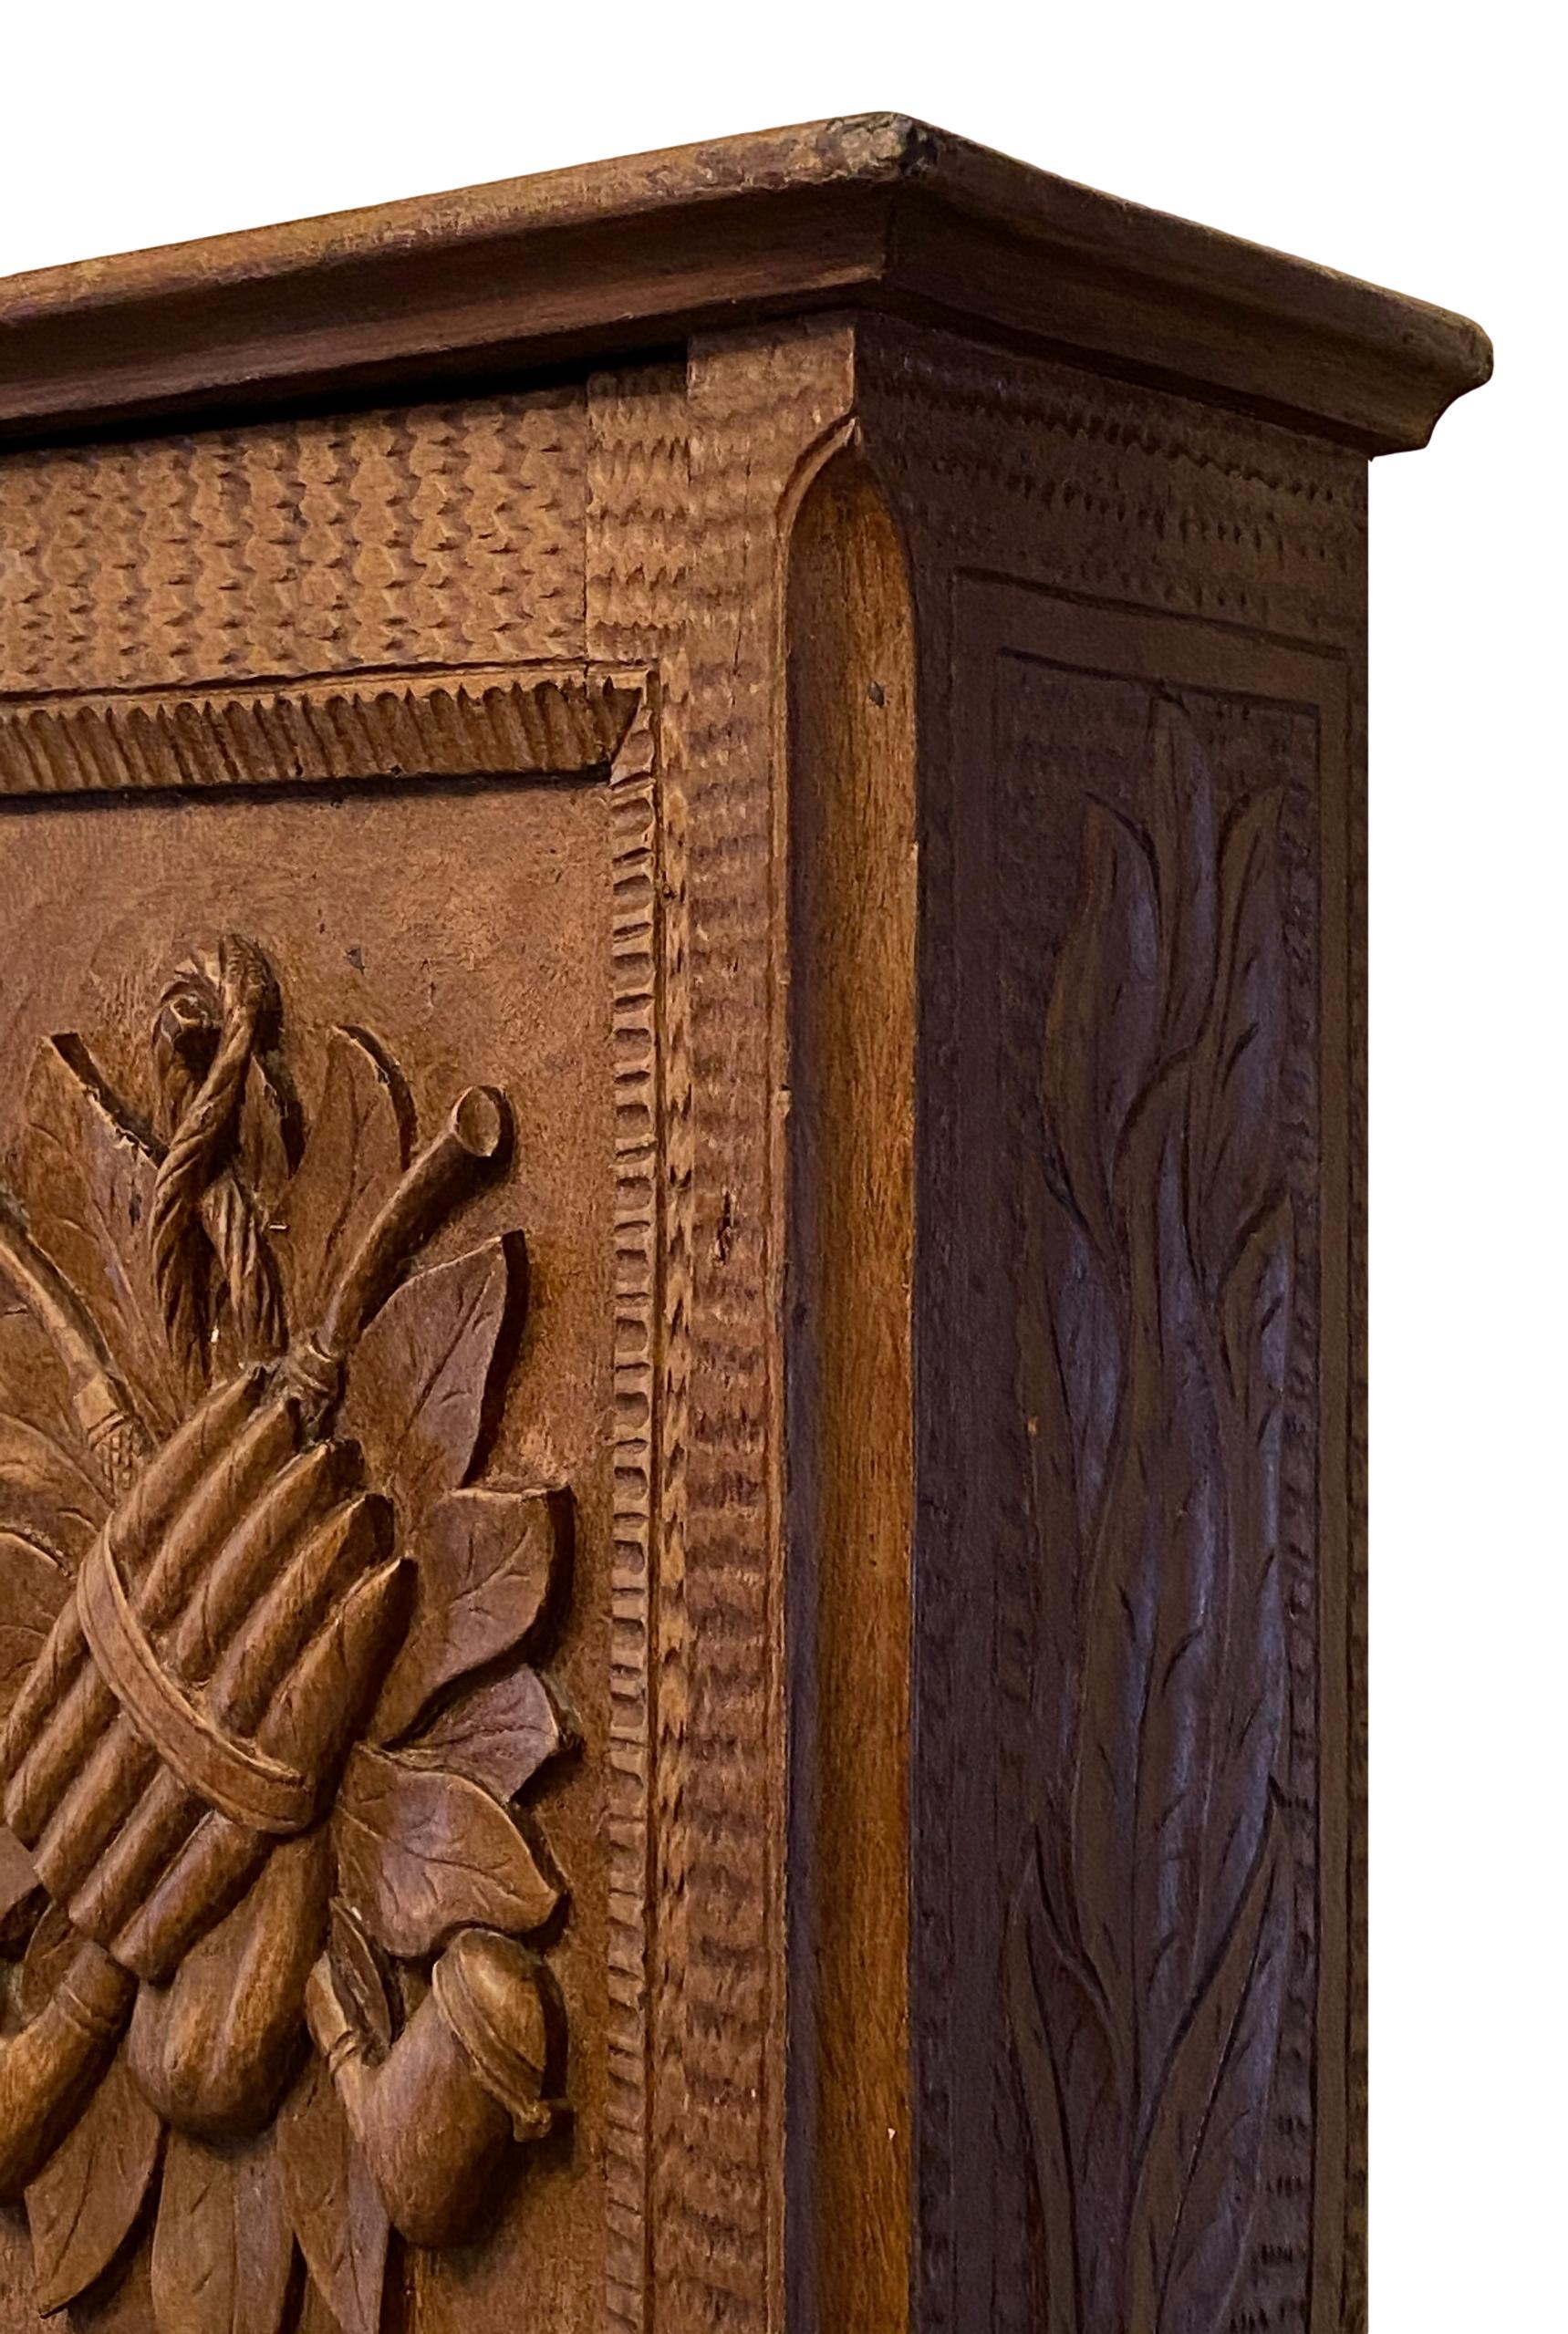 Stunning Black Forest Brienz wood carved wall cabinet. Made in Germany in the 1880s or older. Some color spots, also some old repairs to the wood and a new lock, but this is old-age. Door closes a little strong, but this is also old-age. It has a